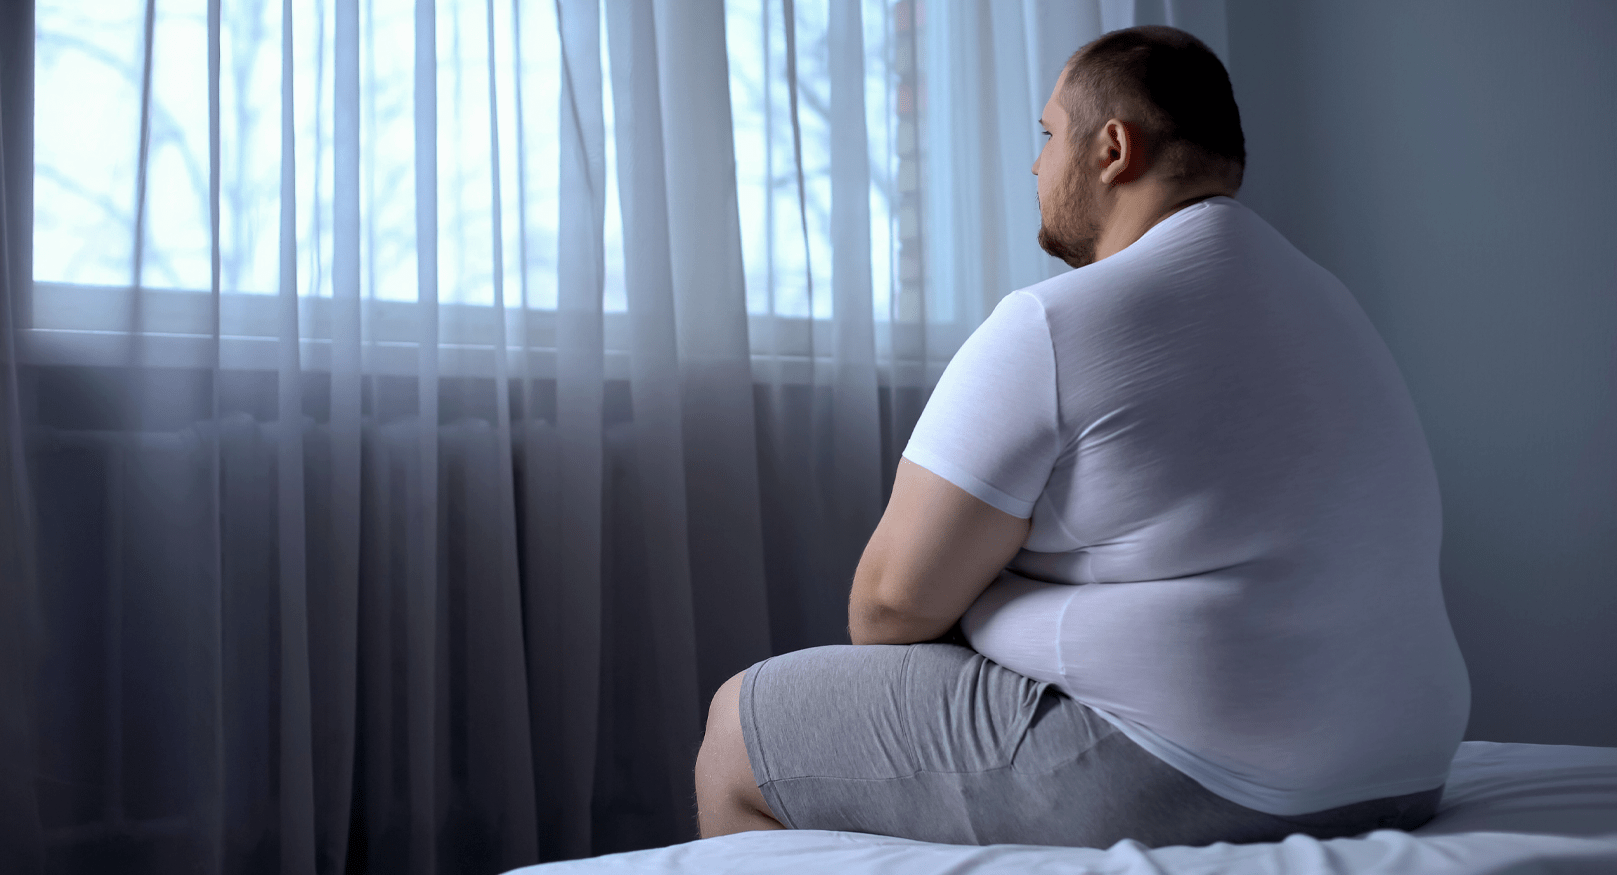 Men Also Discriminated For Being Obese